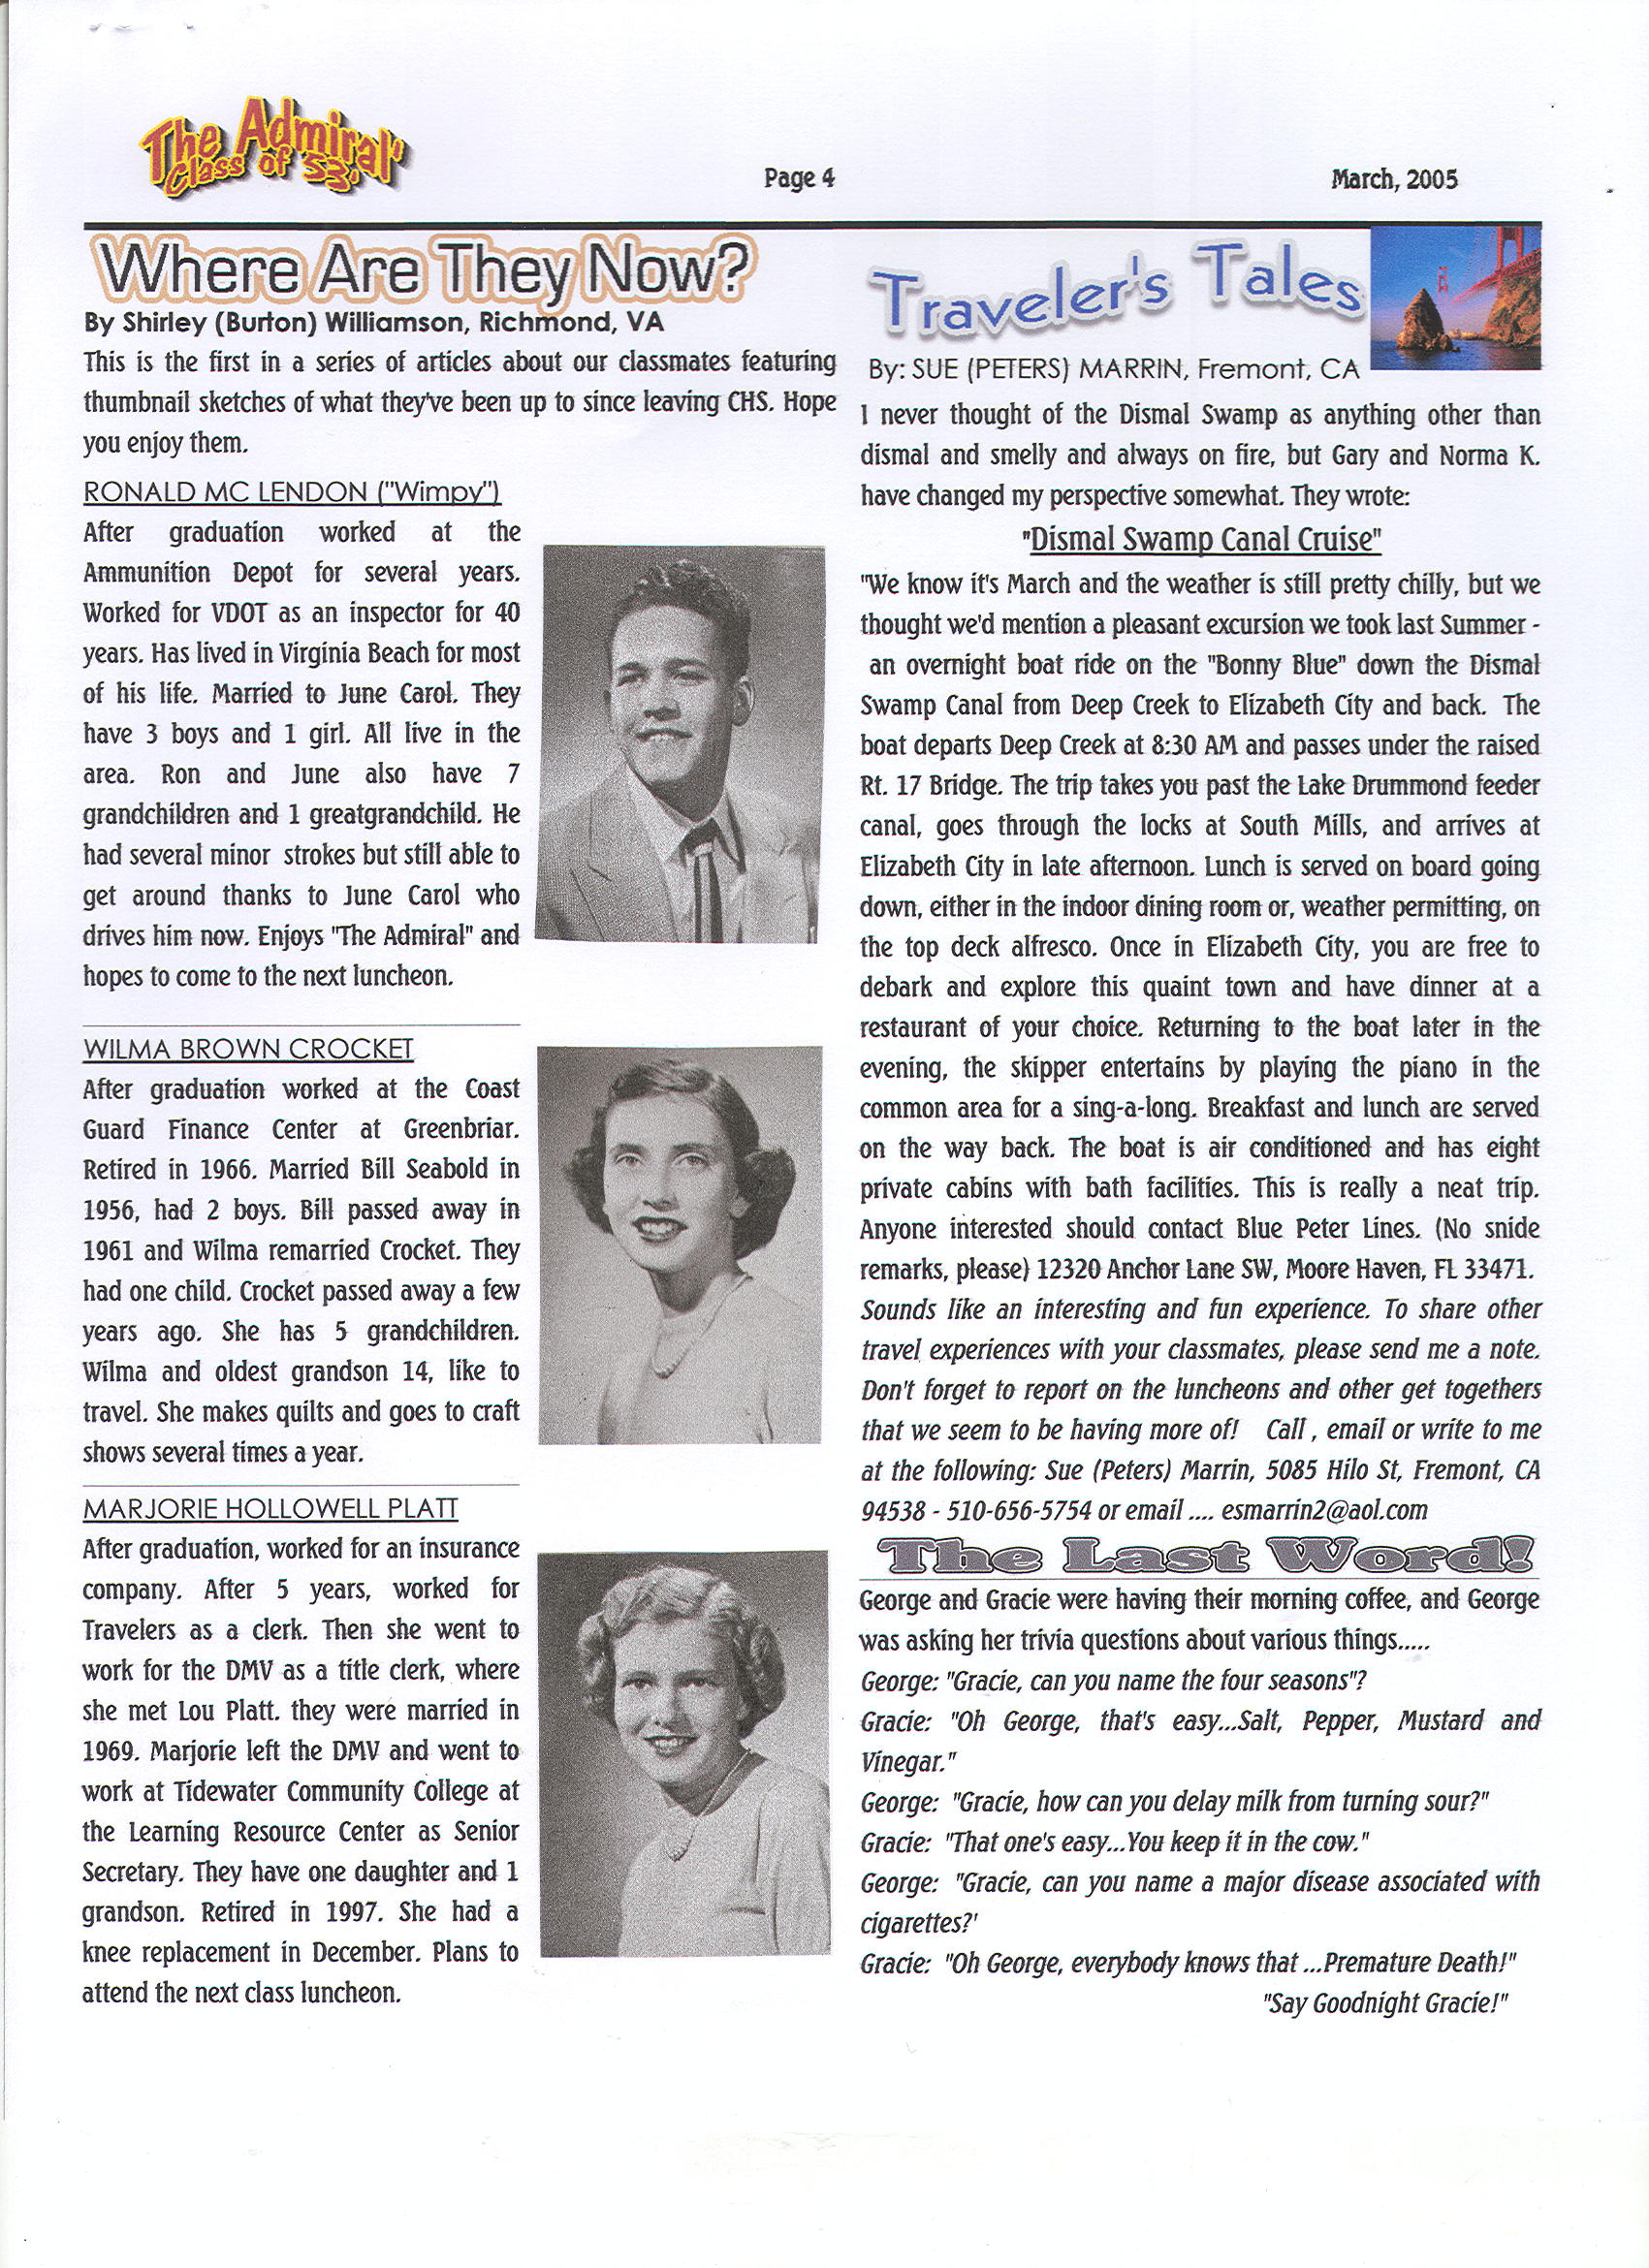 The Admiral - March 2005 - pg. 4